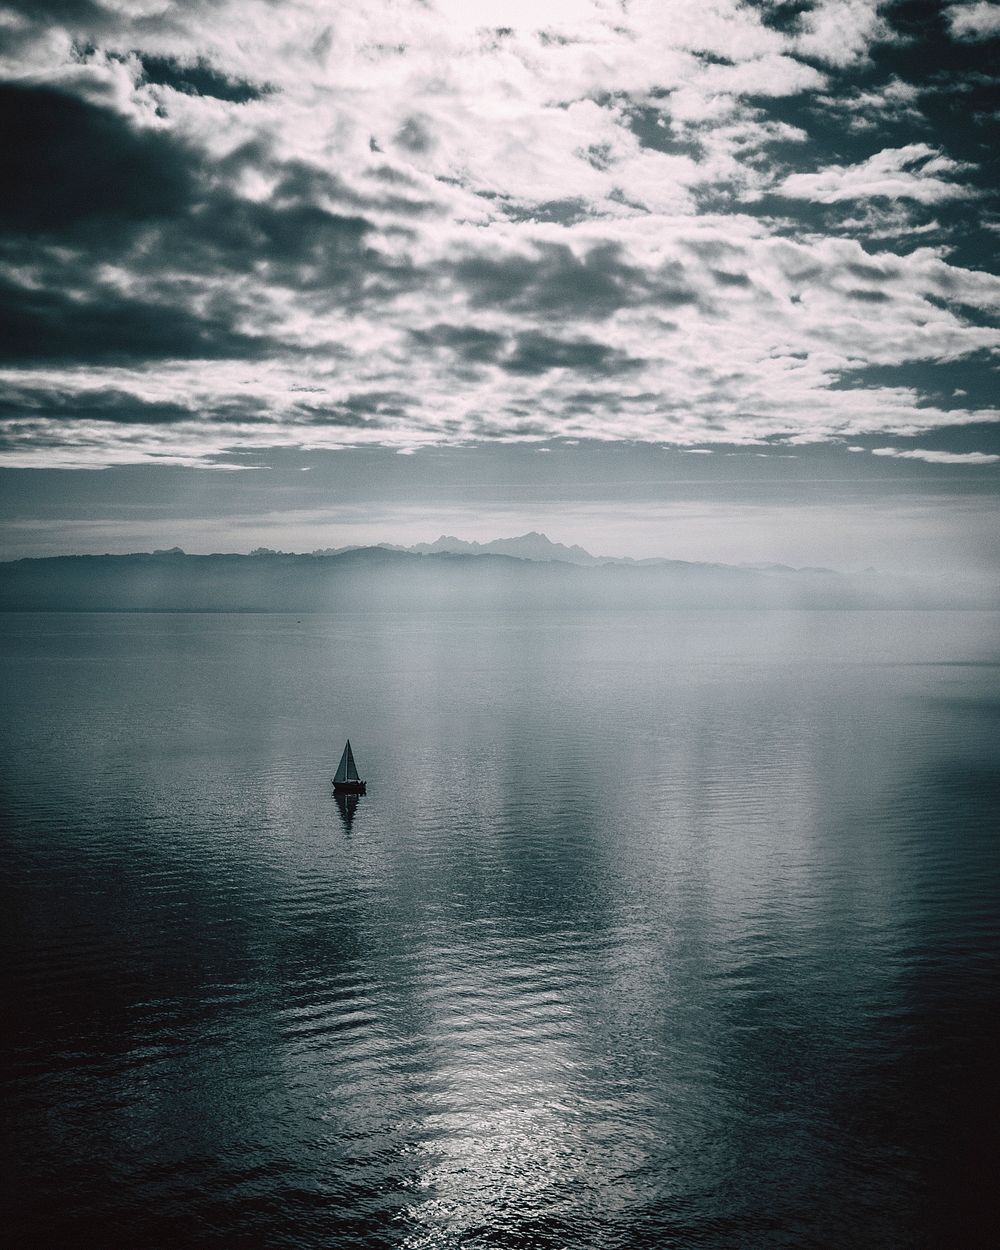 Sailboat on Lake Constance, Germany